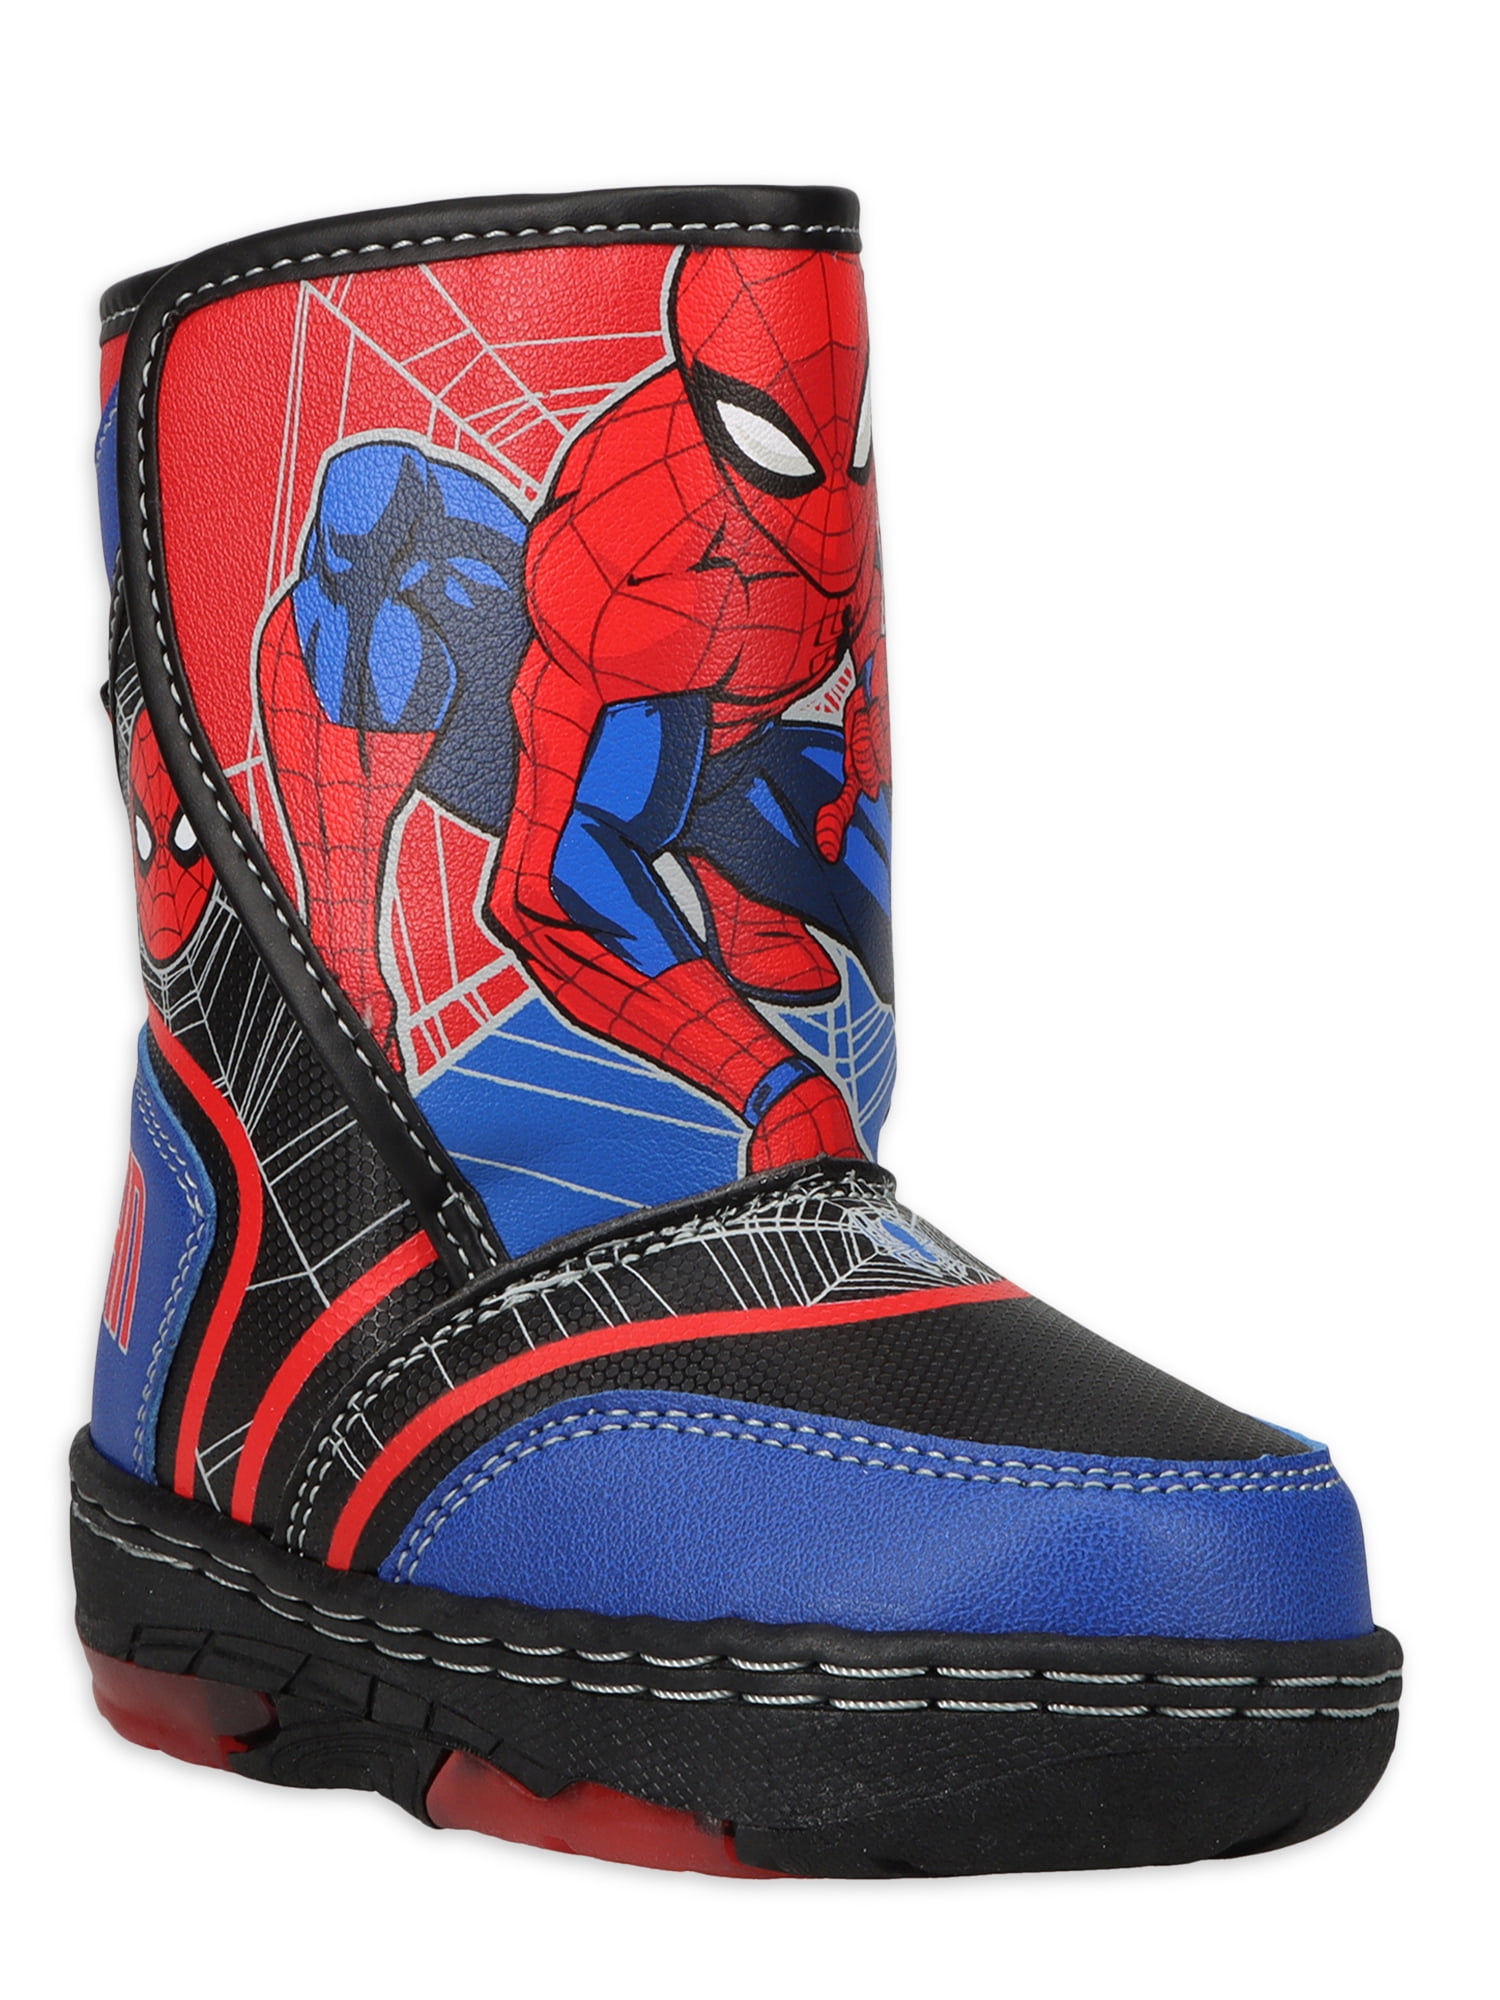 Toddler Sizes Boot, Light-Up Boys Snow 7-12 Spiderman